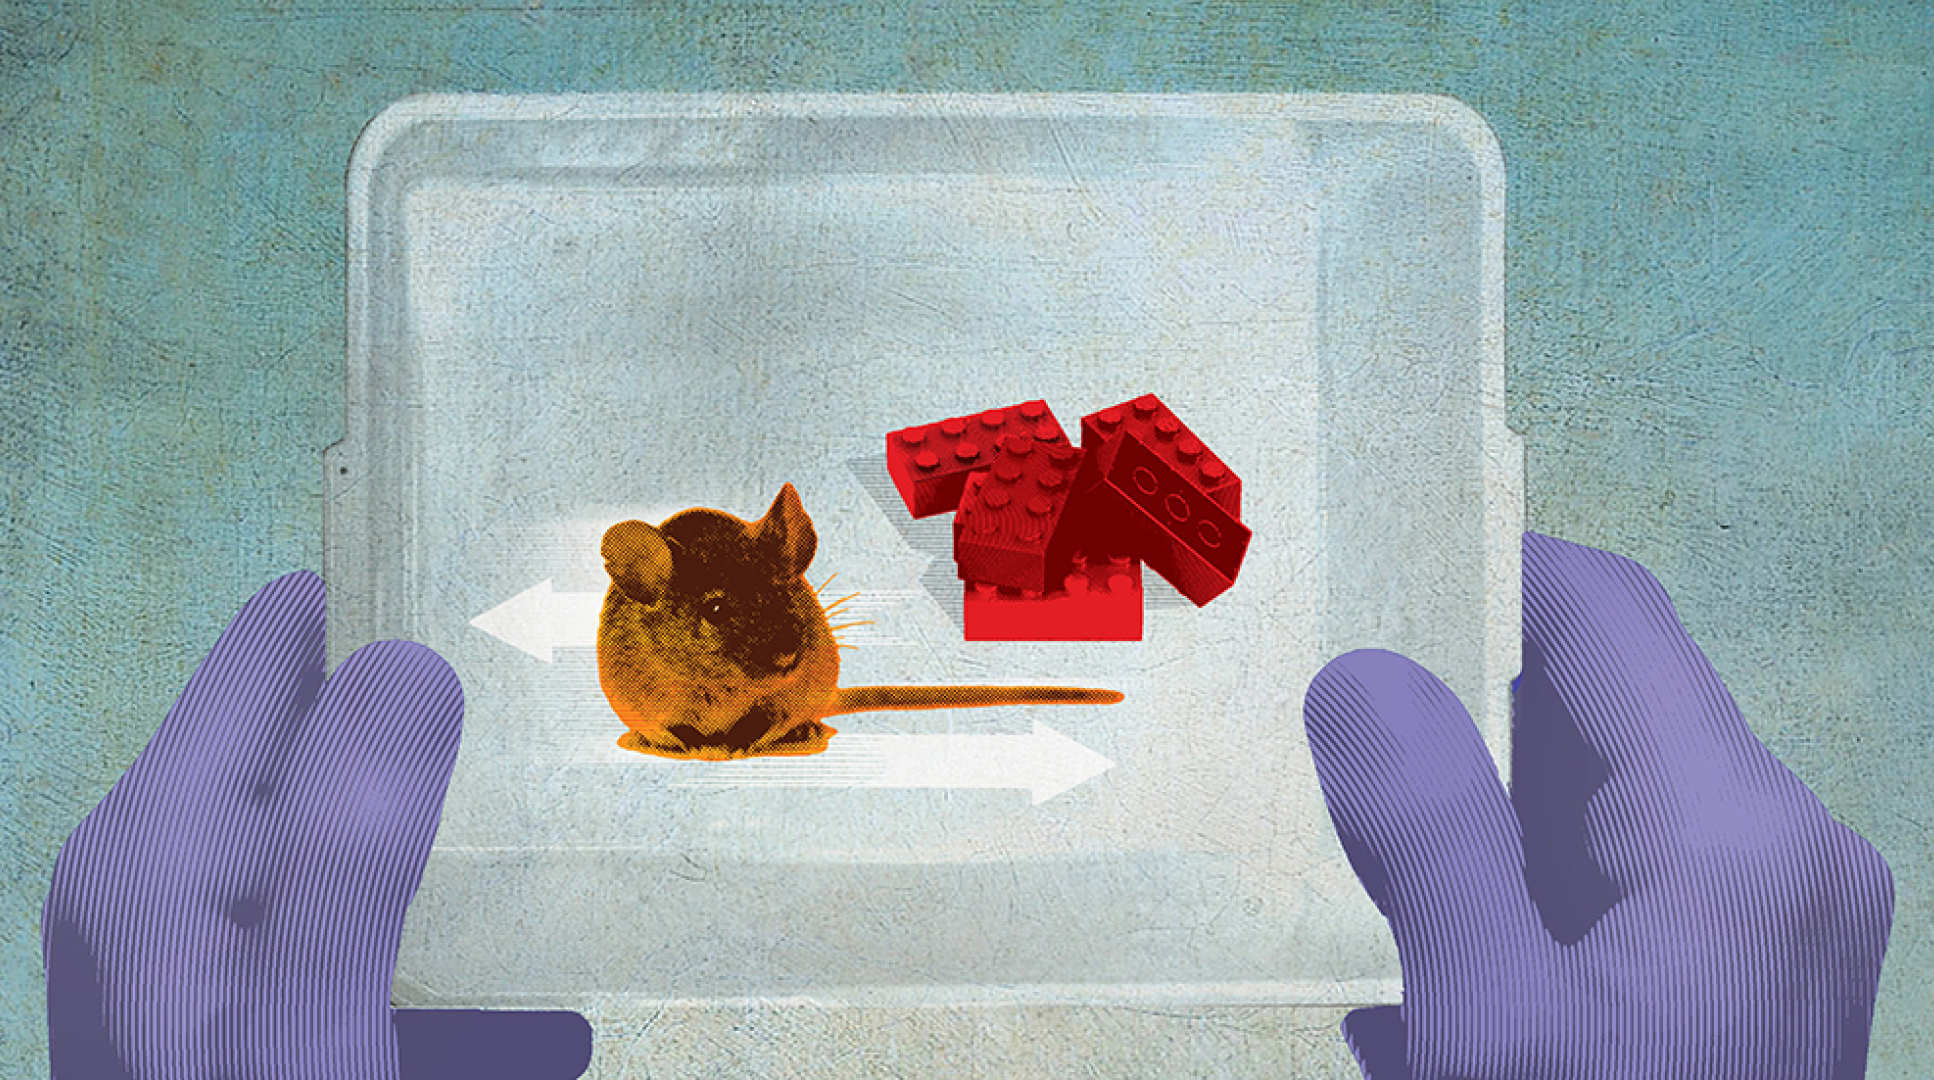 An illustration showing a mouse and lego bricks in a tray, held by two hands